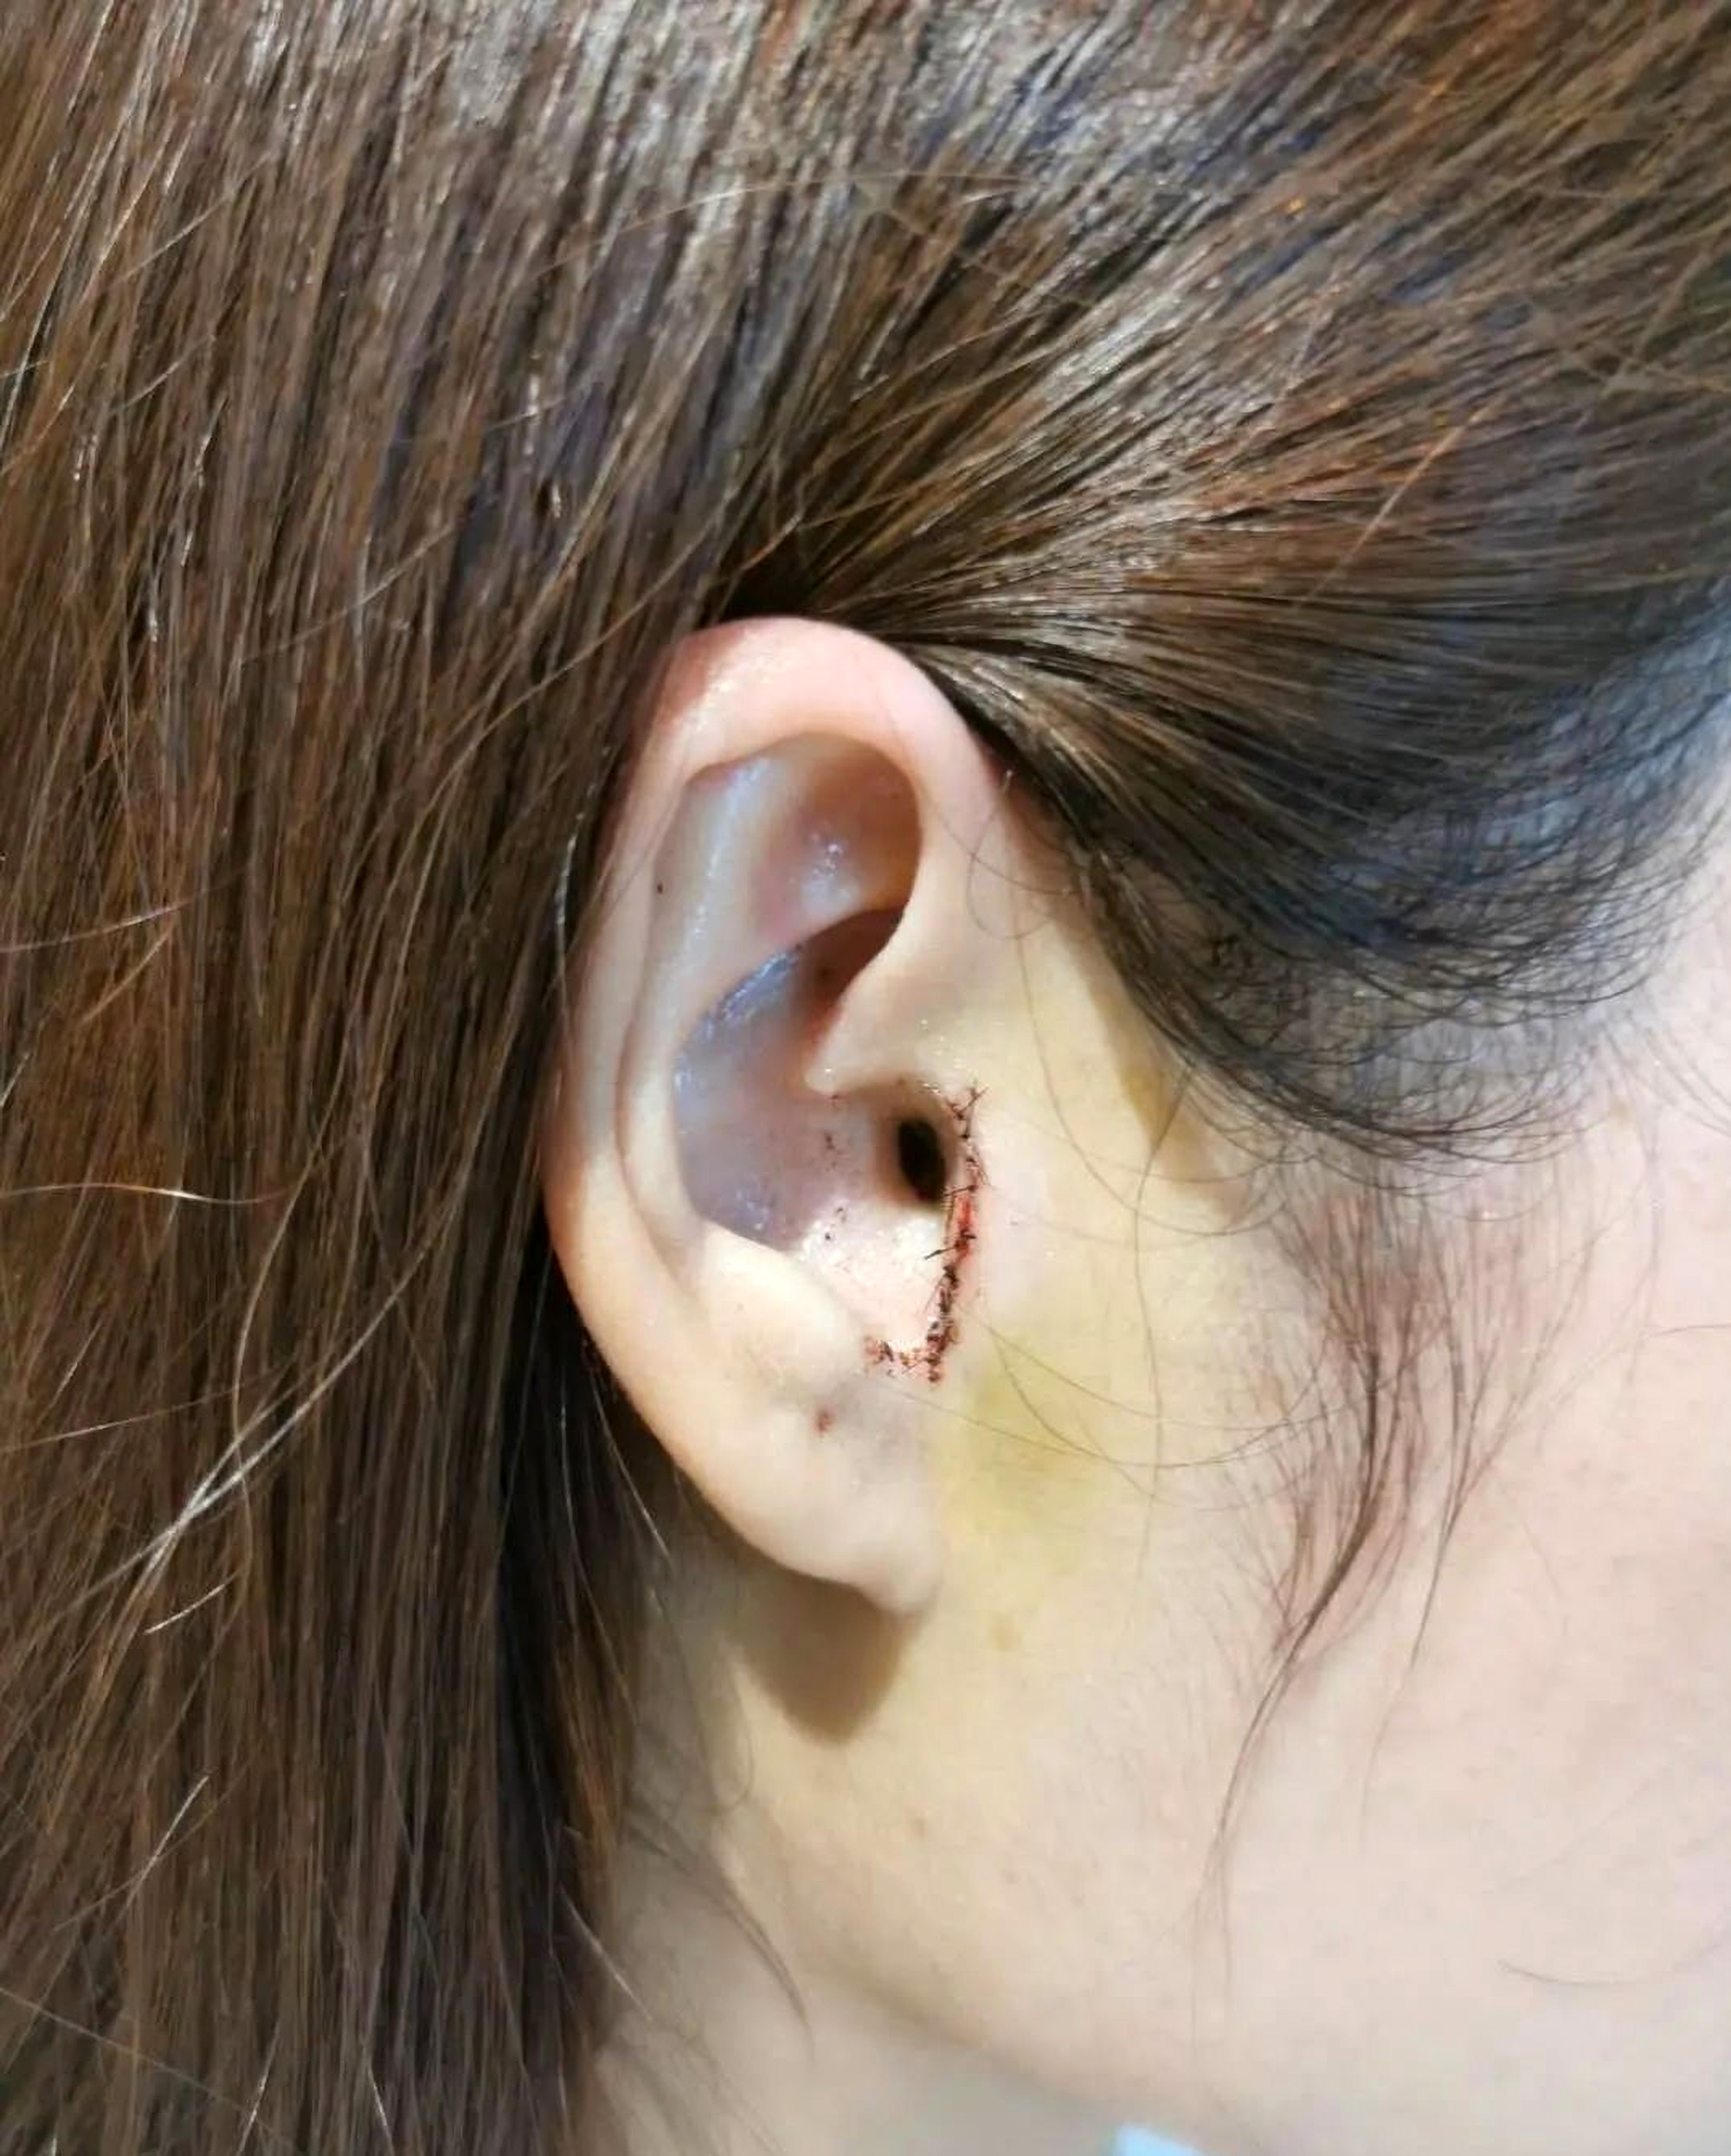 Woman Finds Part Of Ear Missing After Nose Job And Says Wireless